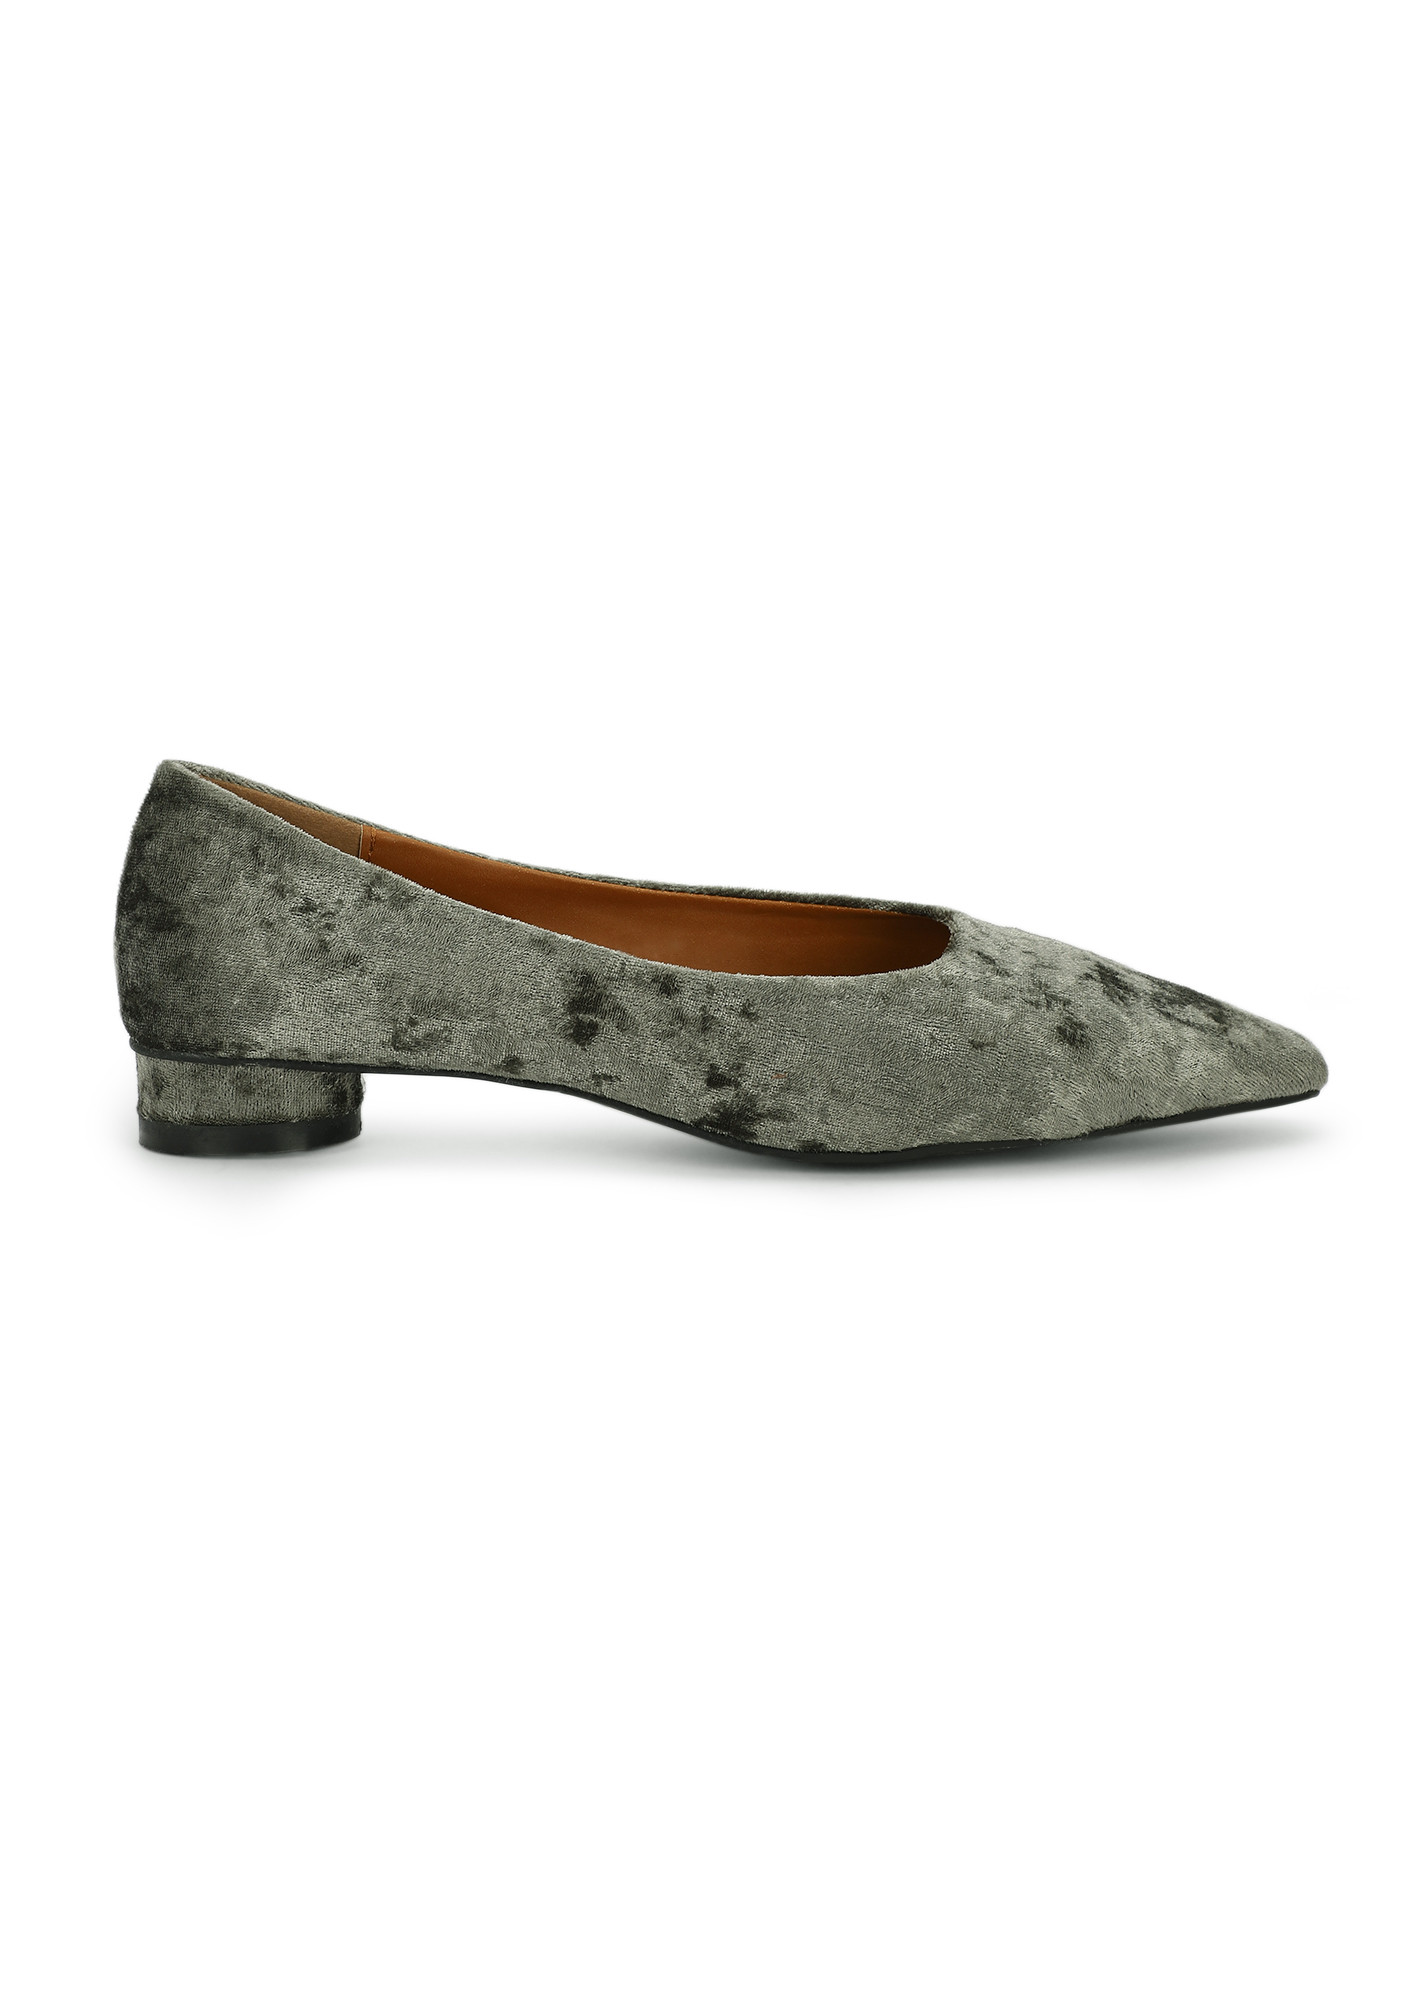 LOOK TO THE LUXE SIDE OLIVE BALLET FLATS